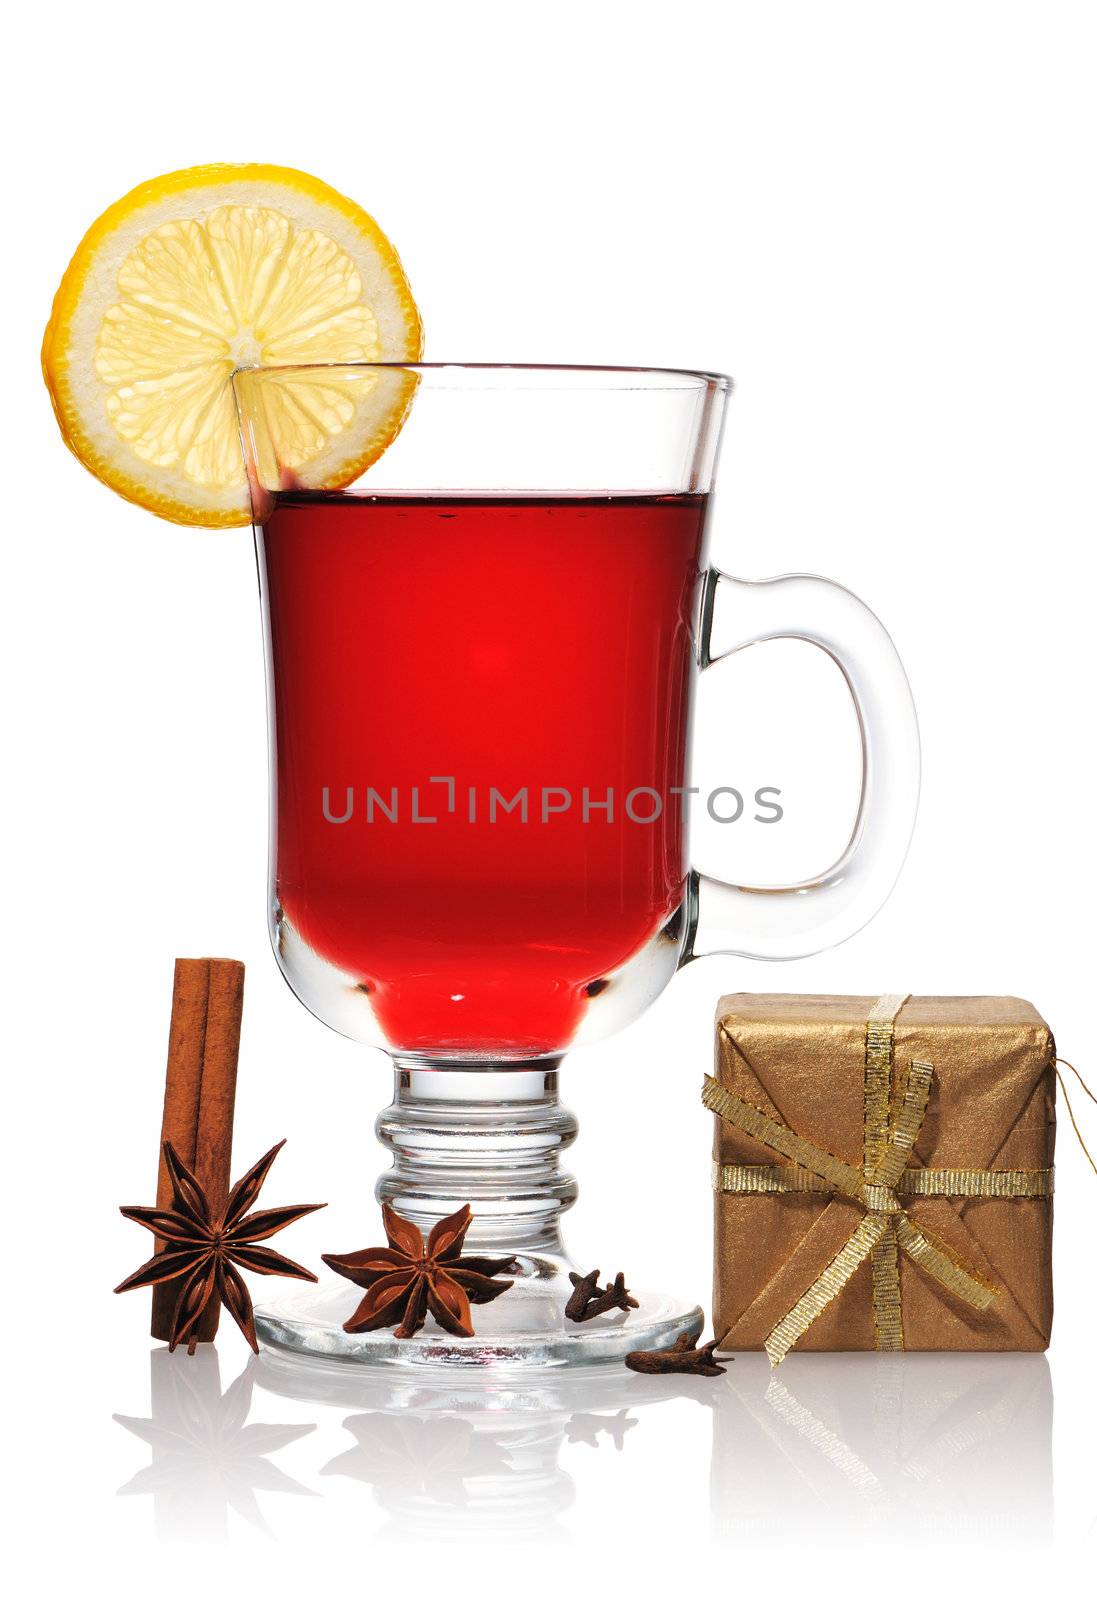 Mulled wine christmas still life isolated on white with soft reflection